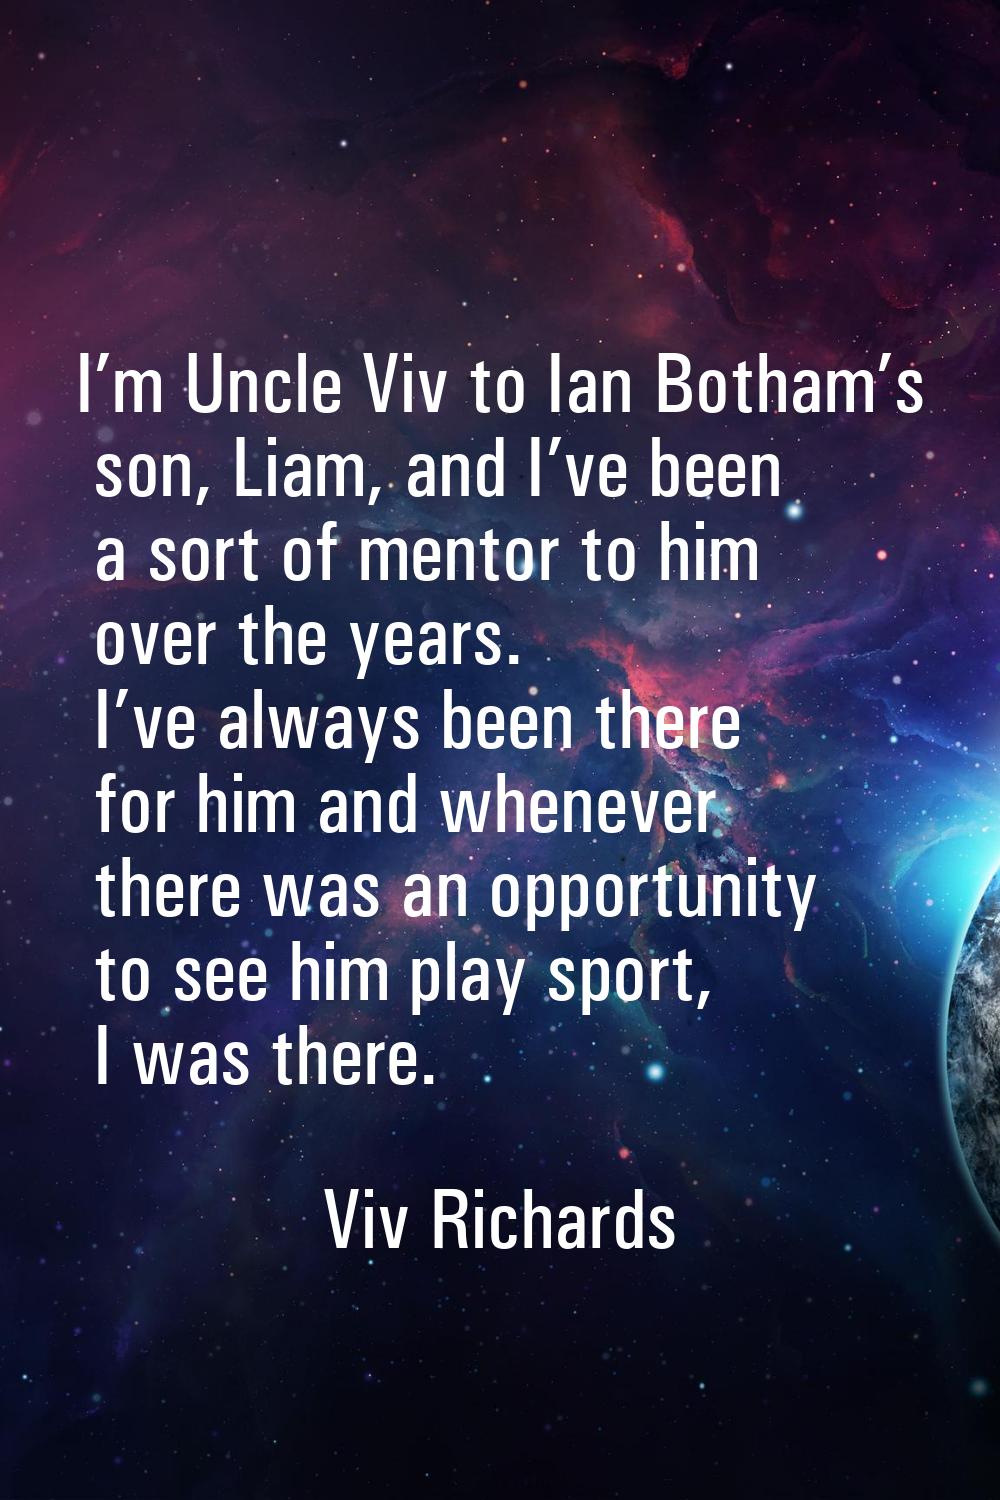 I’m Uncle Viv to Ian Botham’s son, Liam, and I’ve been a sort of mentor to him over the years. I’ve